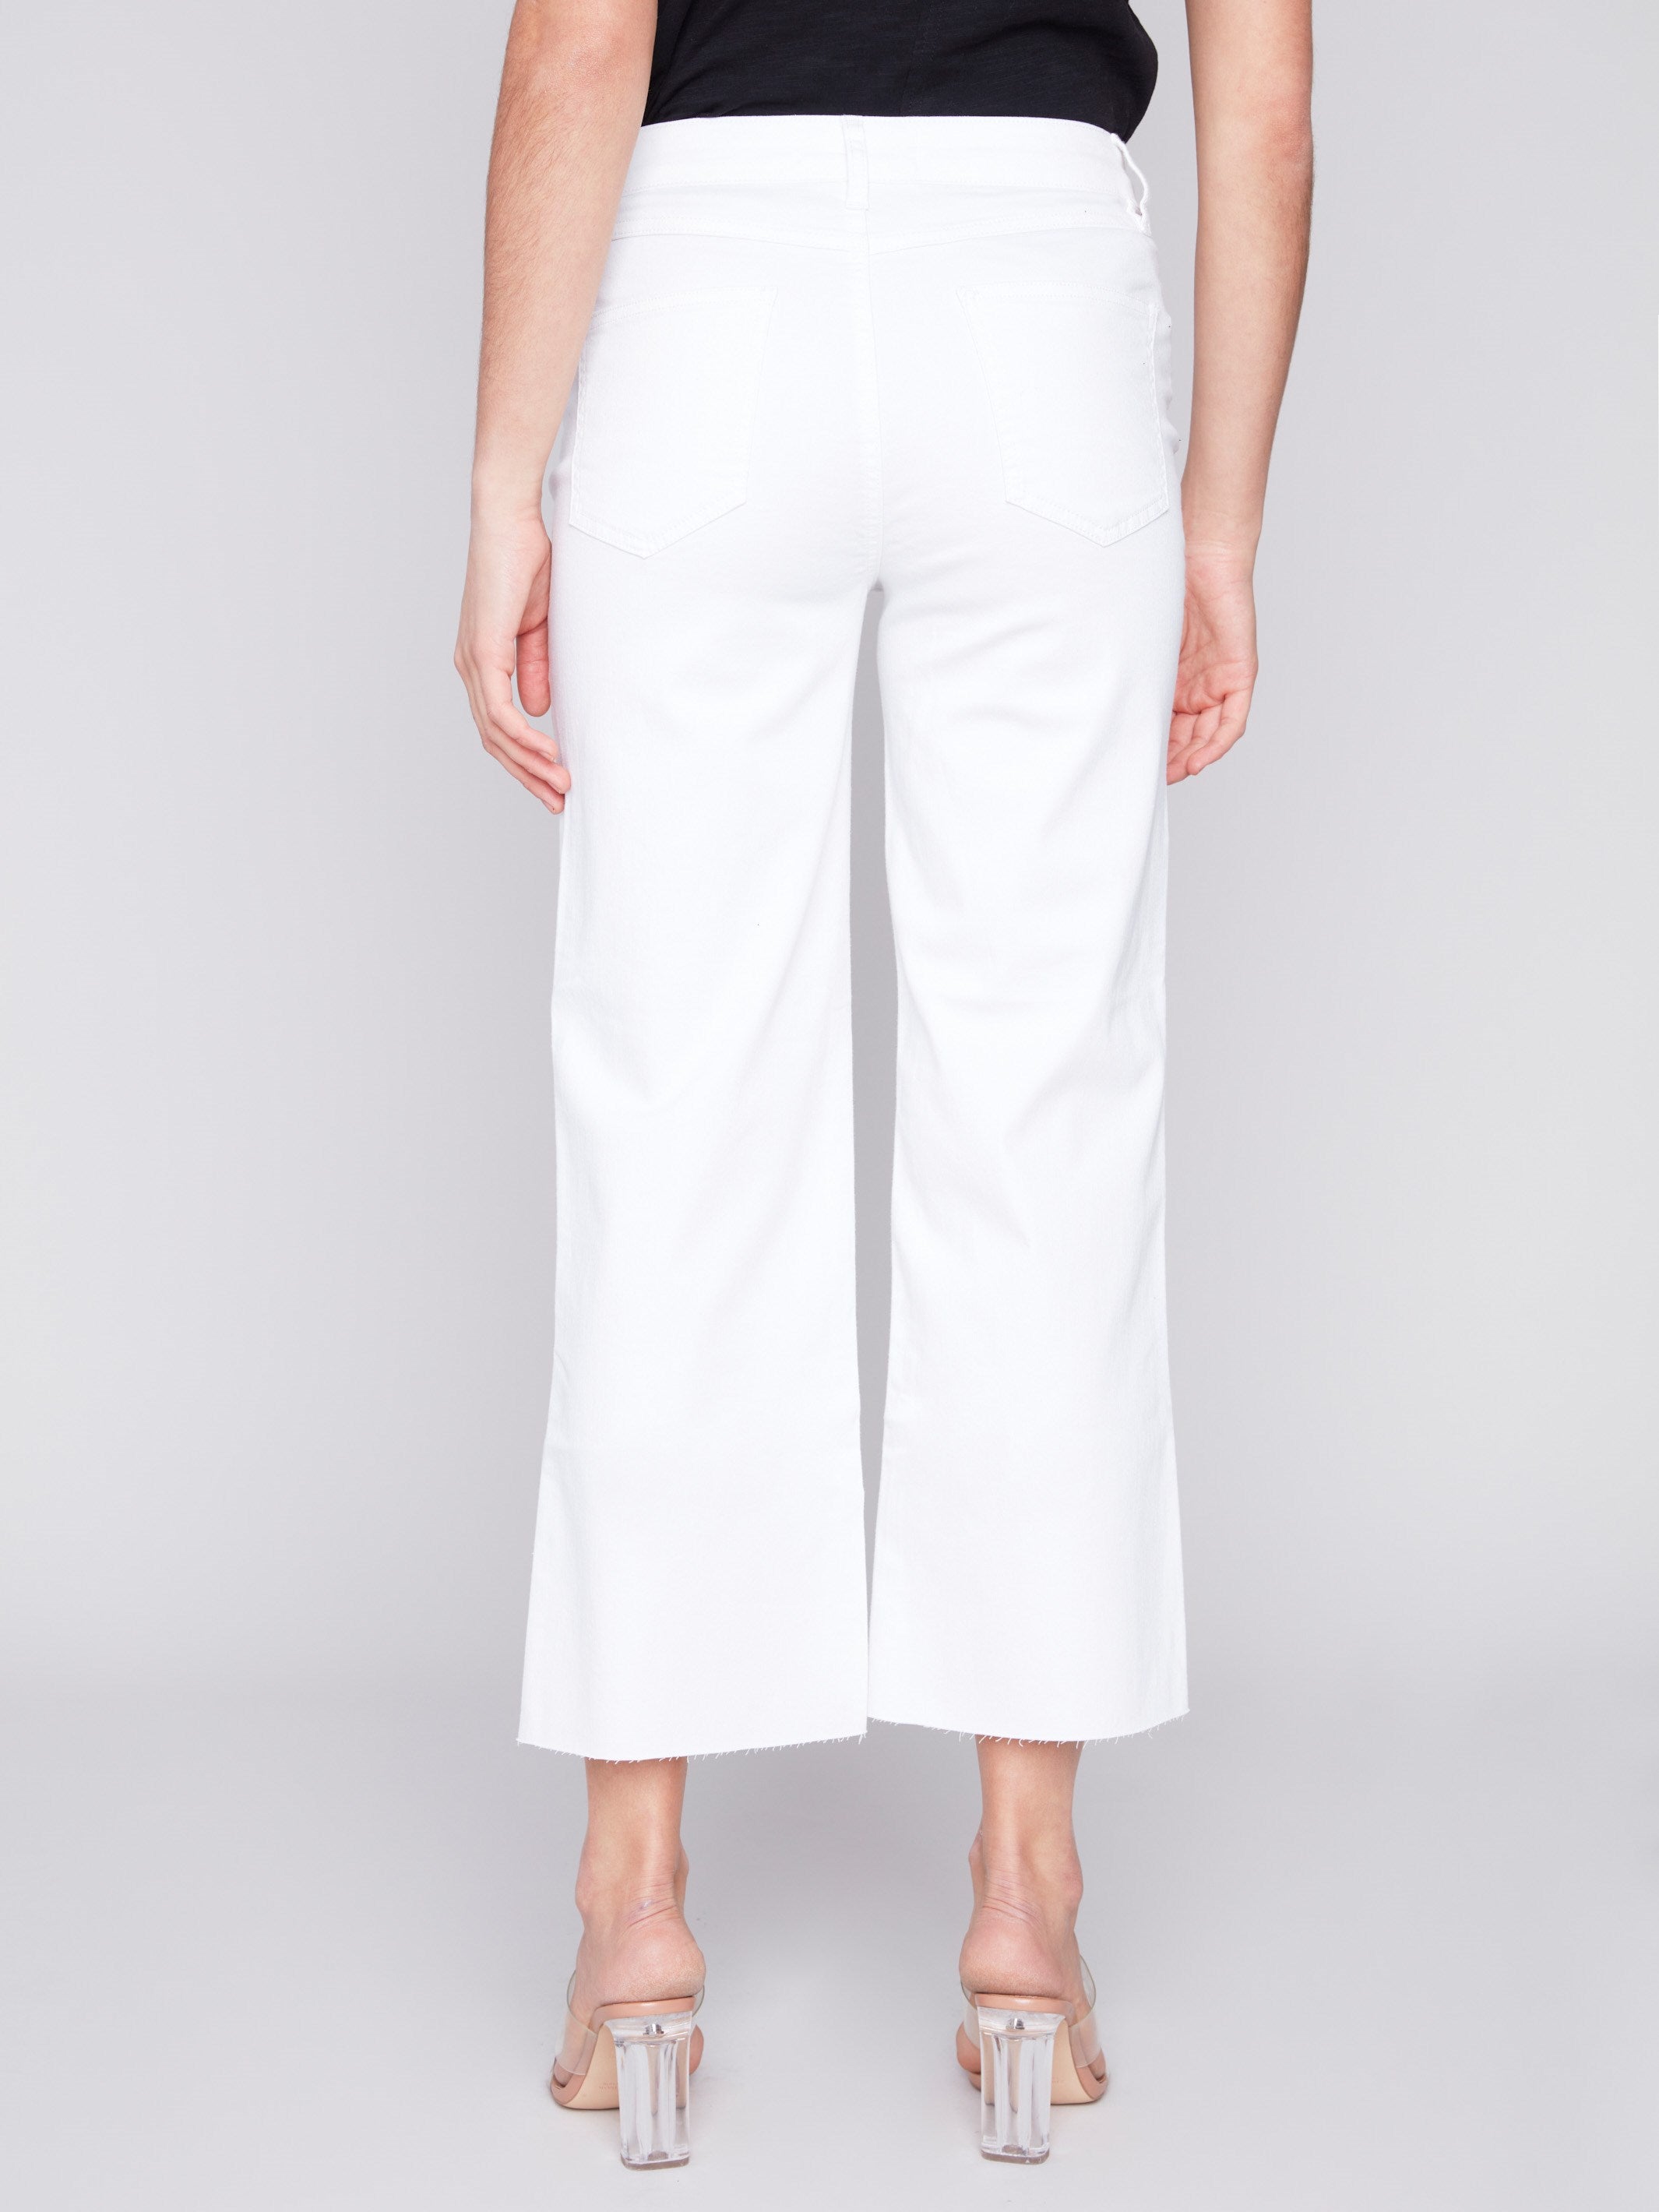 Flared Twill Jeans with Raw Edge - White - Charlie B Collection Canada - Image 3